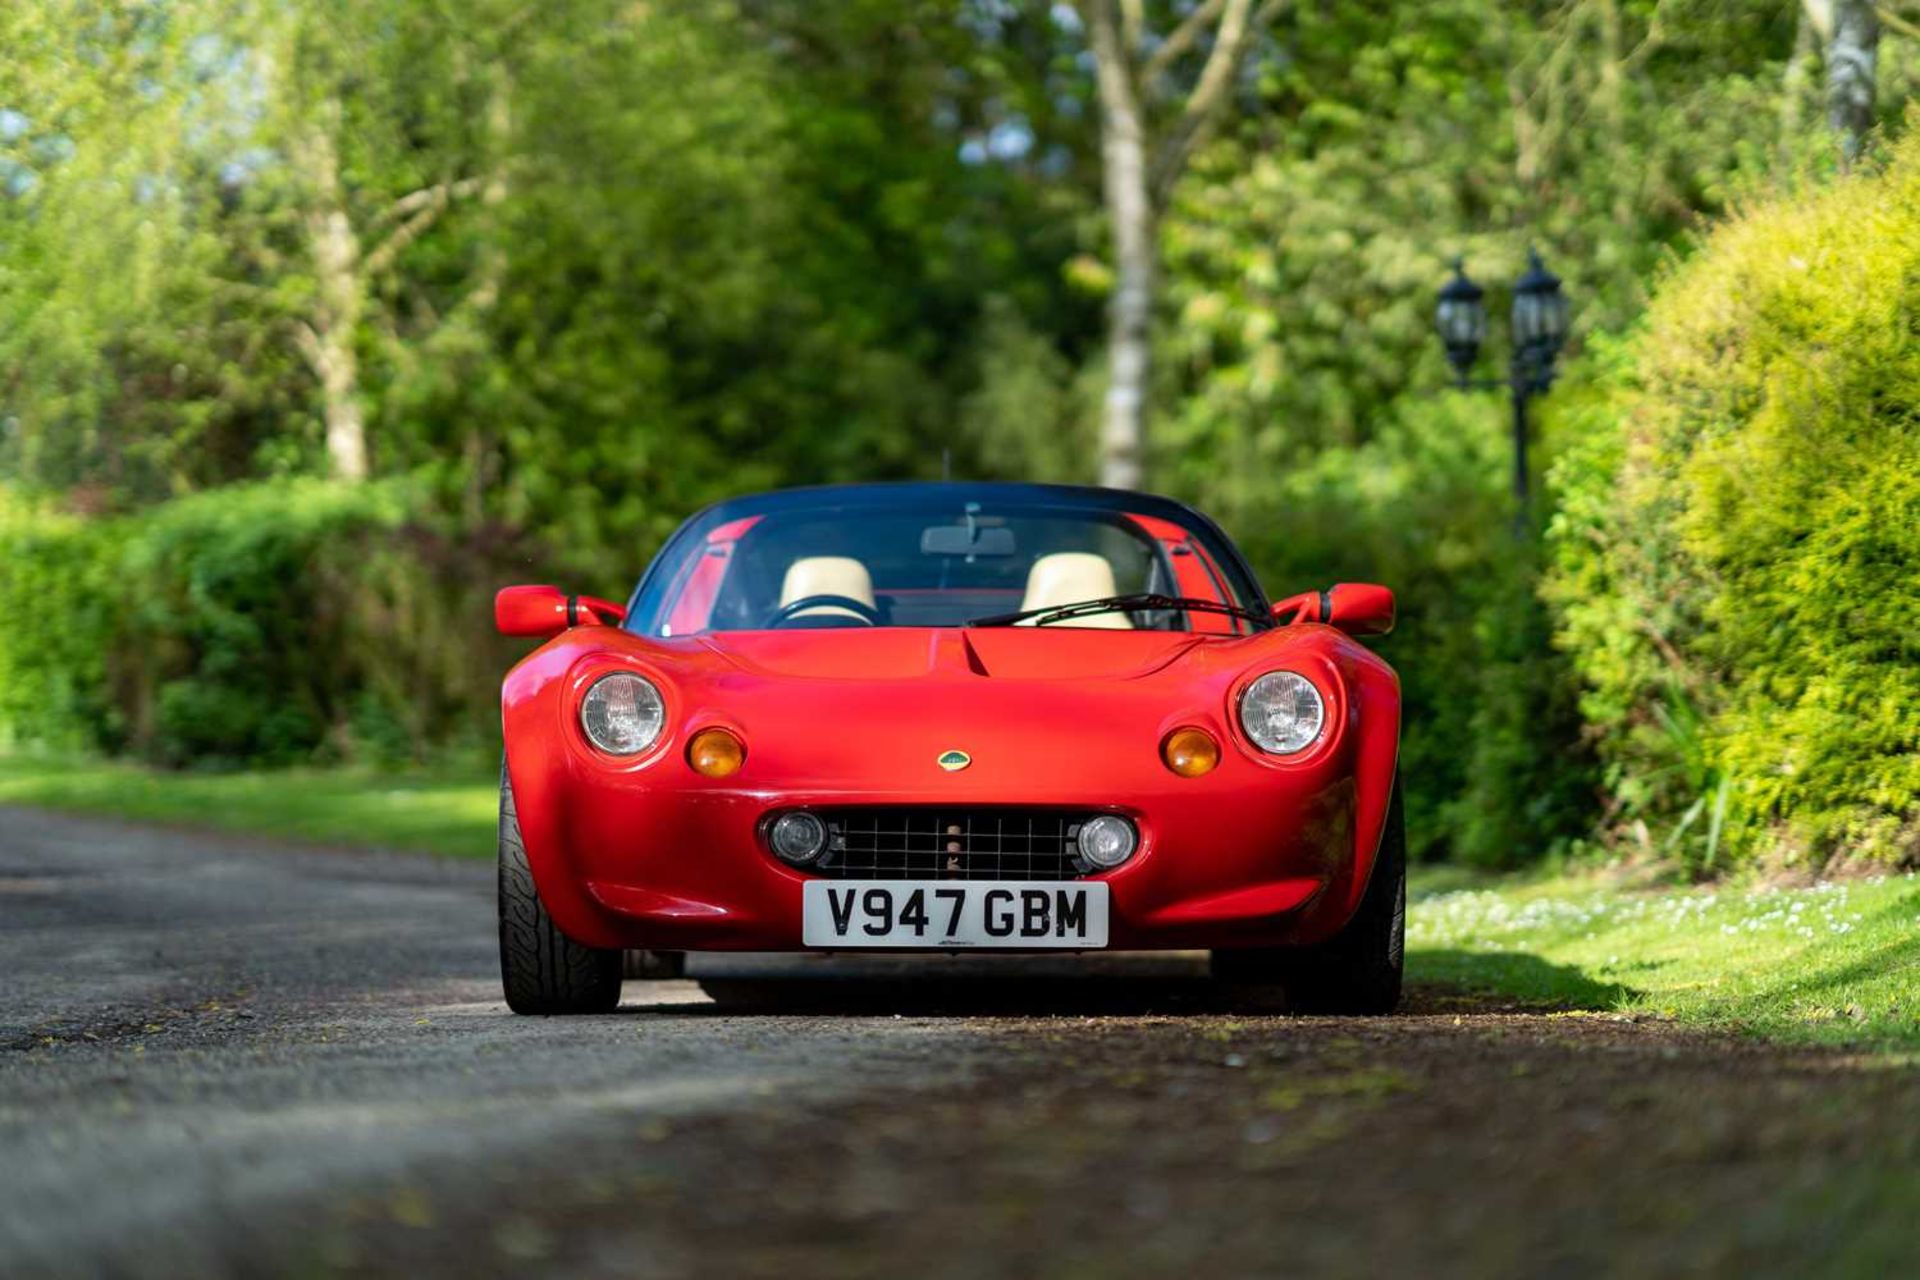 1999 Lotus Elise S1 Only 39,000 miles from new - Image 17 of 57